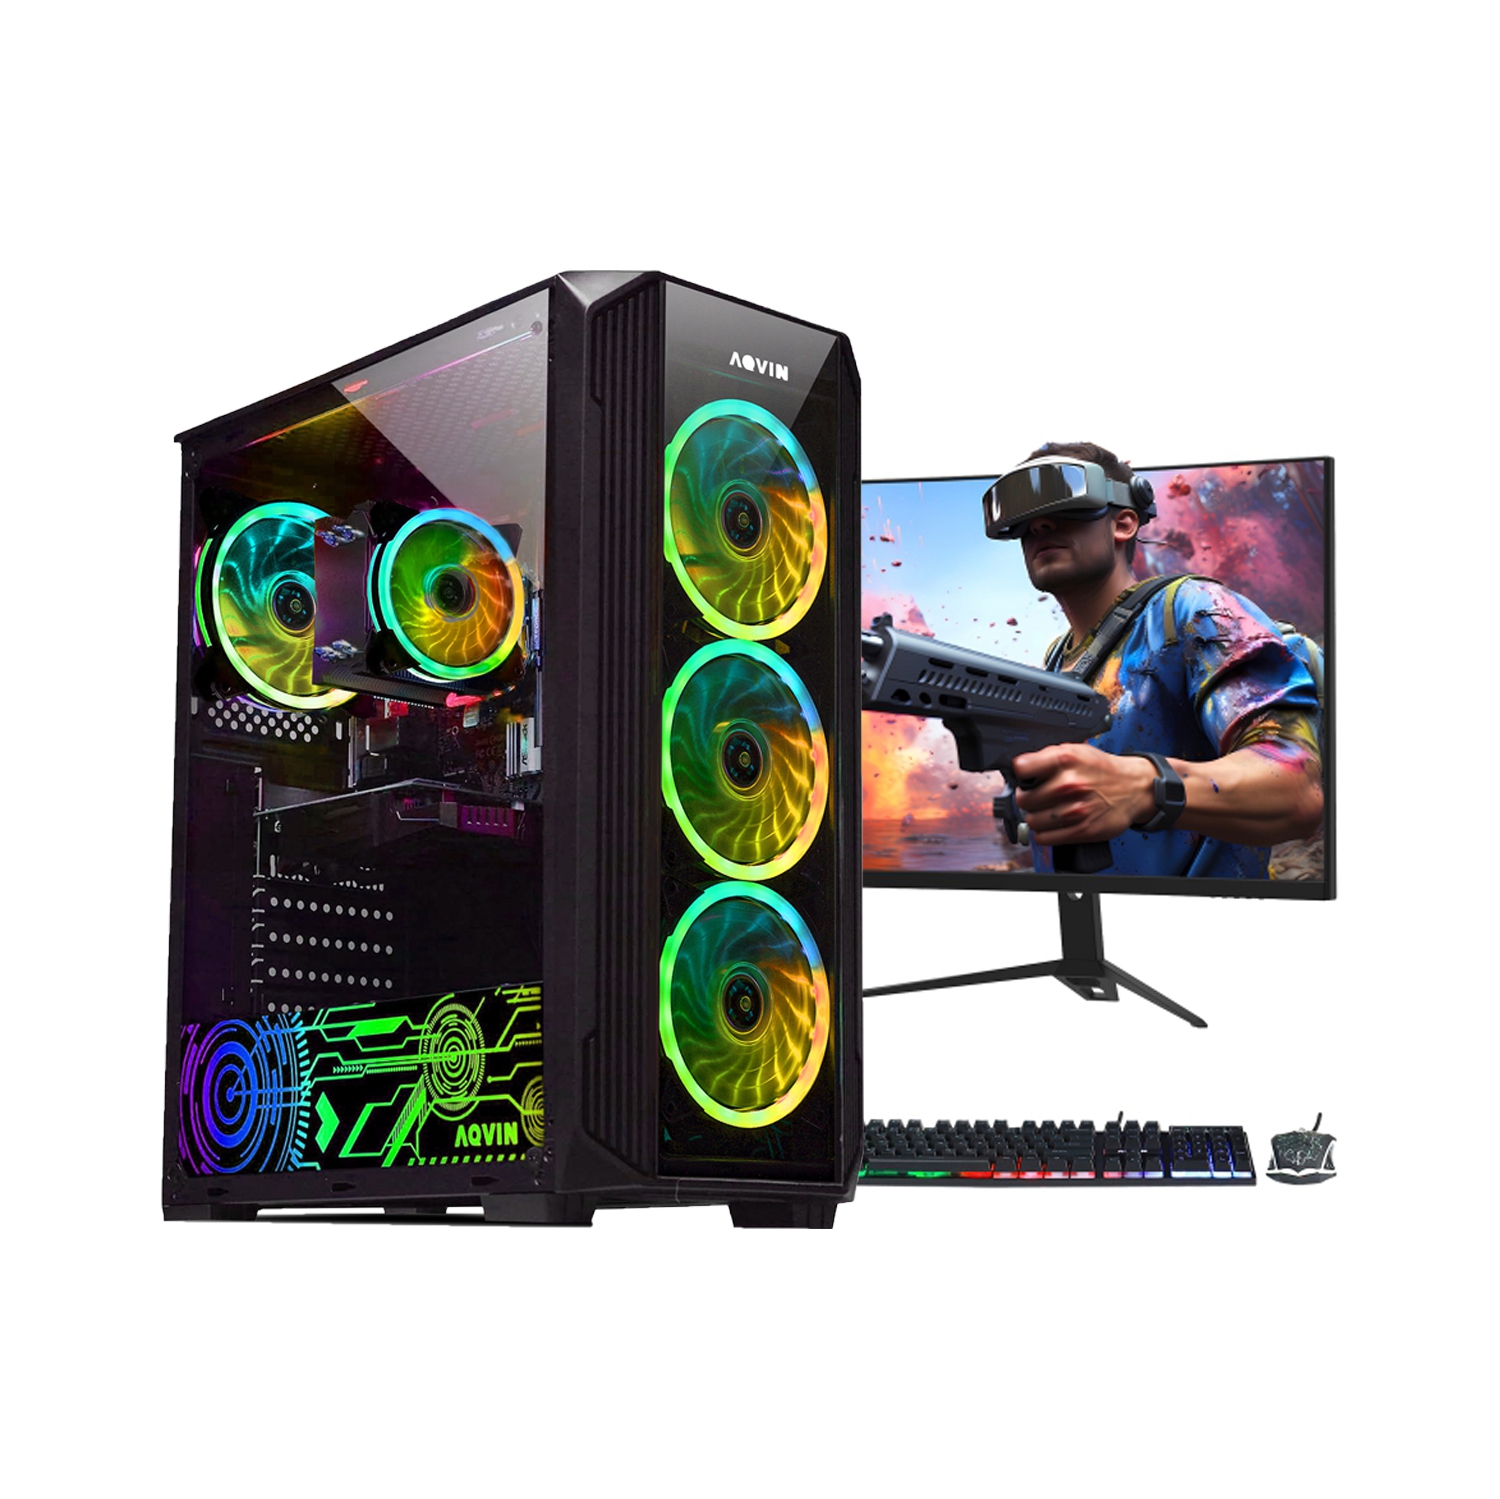 Gaming PC AQVIN ZForce Desktop Computer - 27 inch Curved Gaming Monitor (Intel Hexa-Core i7/ GeForce RTX 3070 8GB GDDR6/ 2TB SSD/ 32GB DDR4 RAM/ Windows 11 Pro) - Only at Best Buy